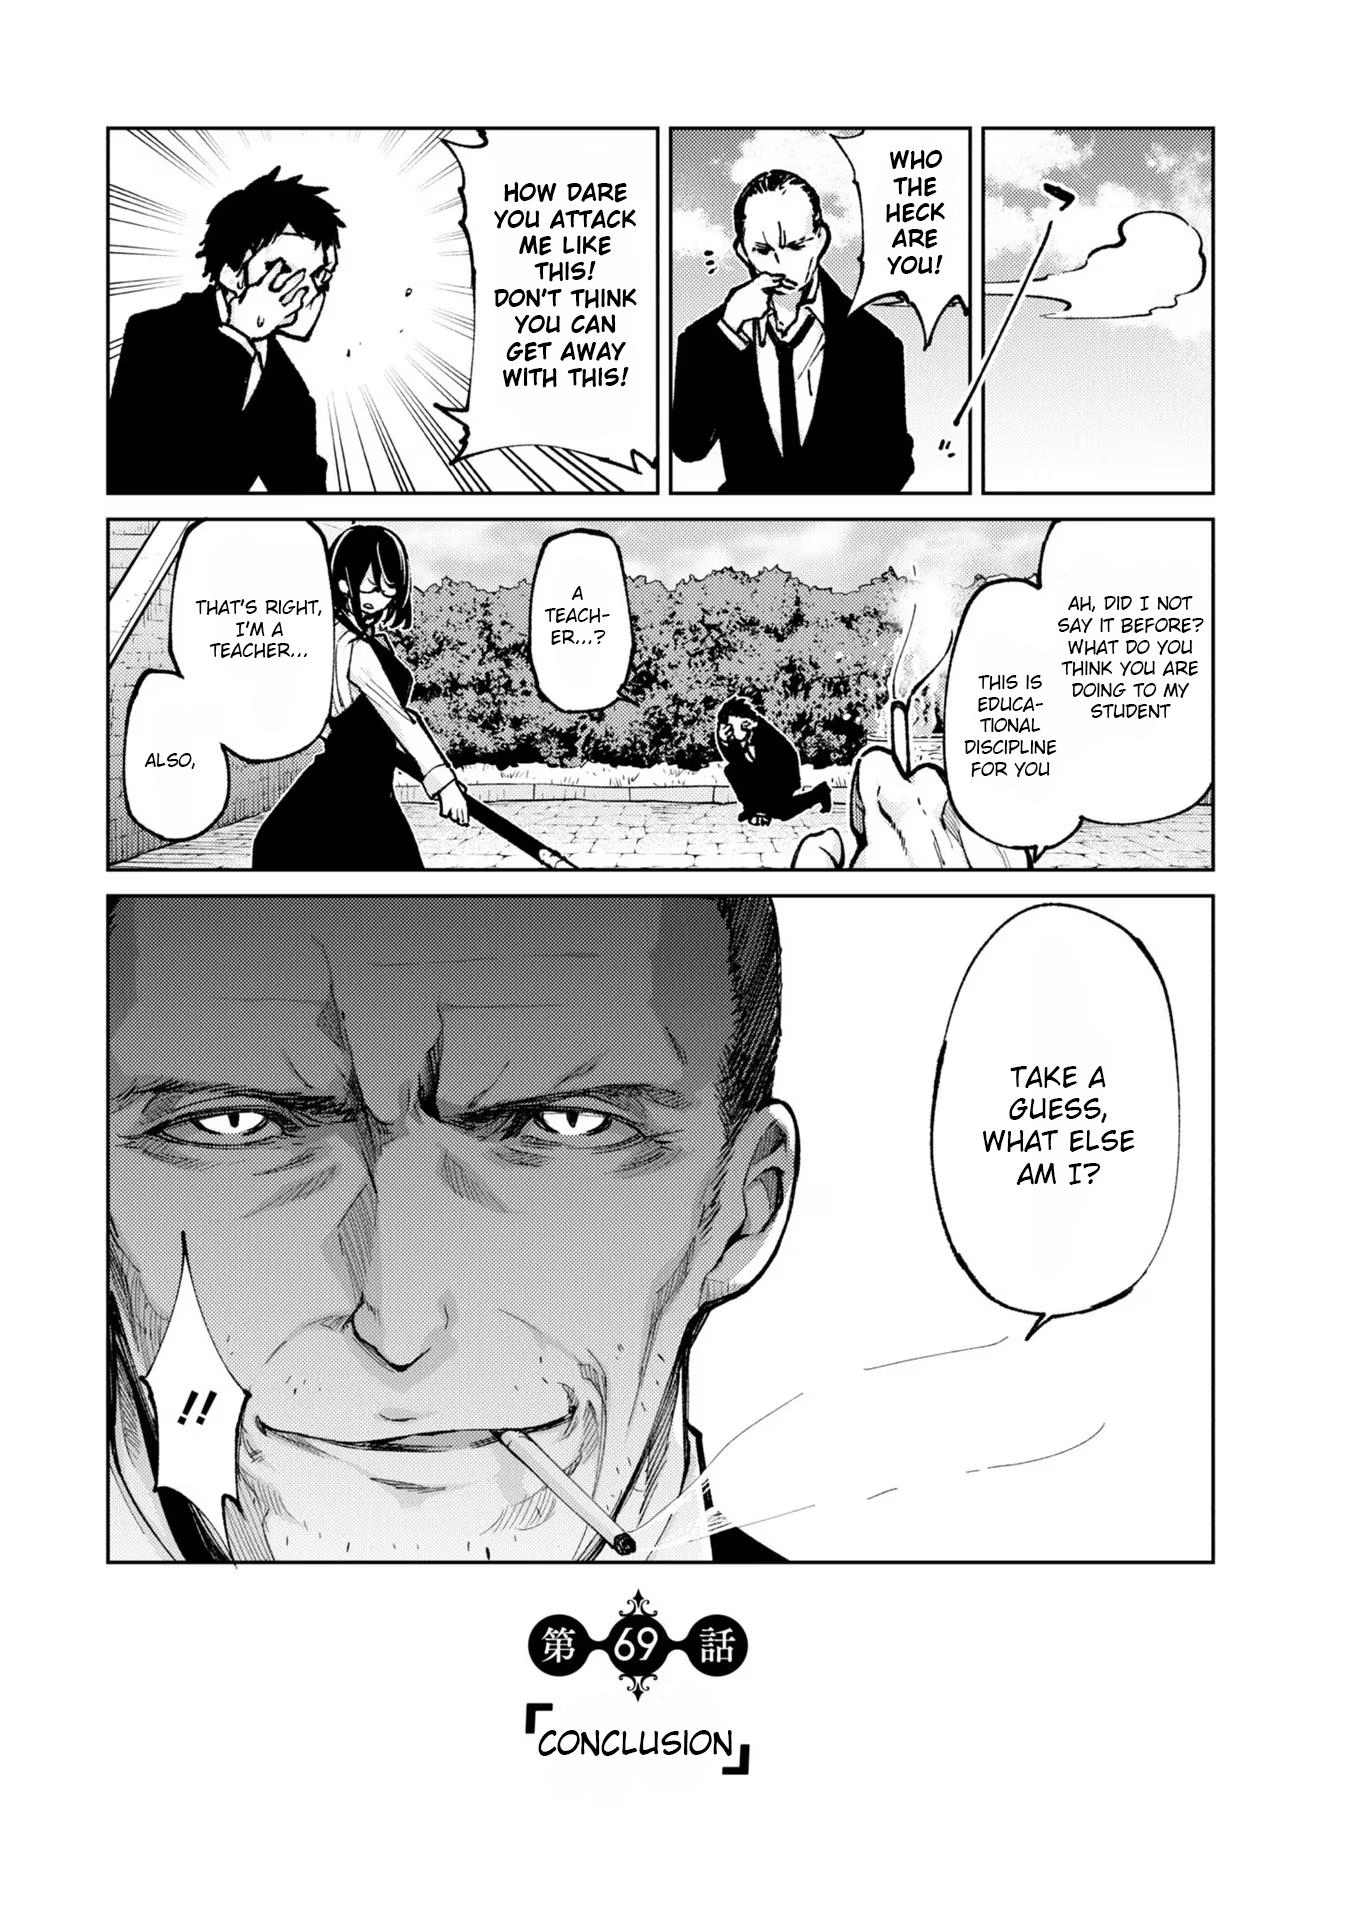 The Foolish Angel Dances With Demons Vol.15 Chapter 69: Conclusion - Picture 1